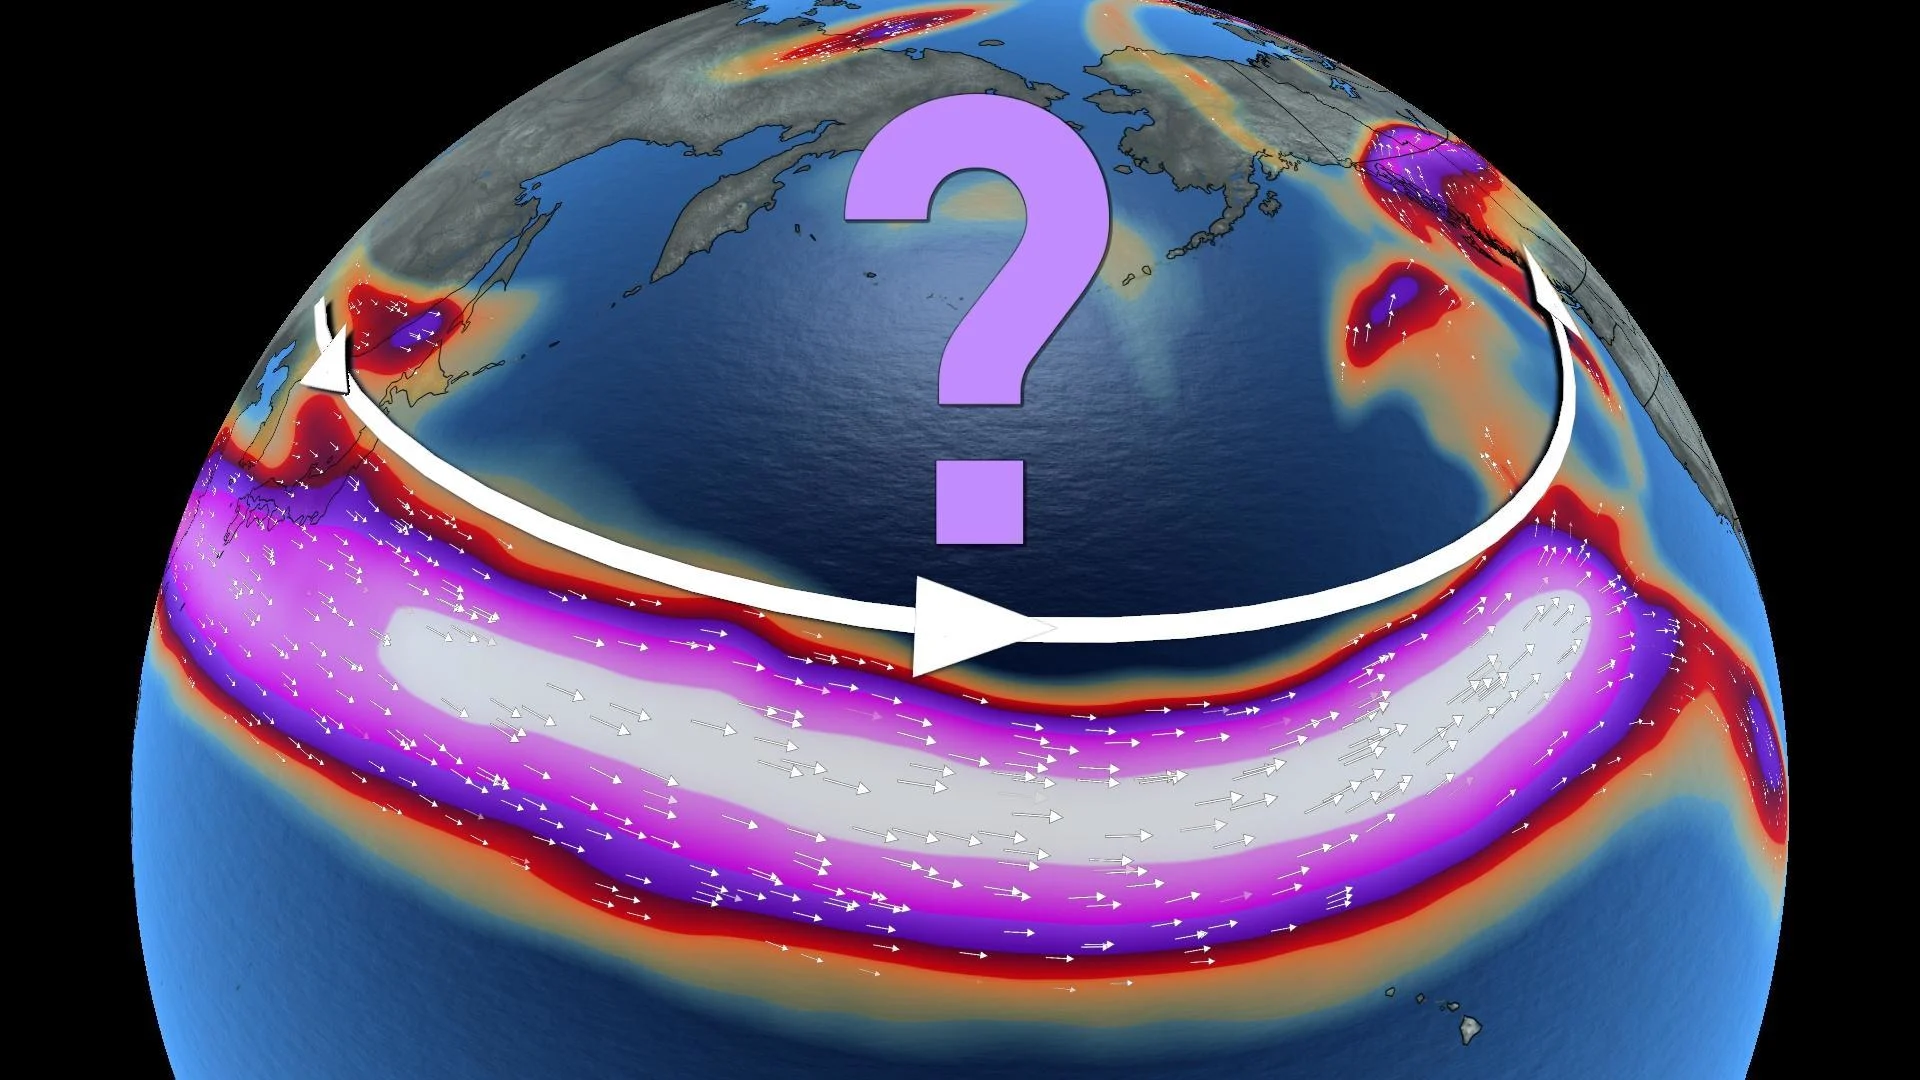 A 10,000-km-long, super-straight jet stream poses issues for Canada